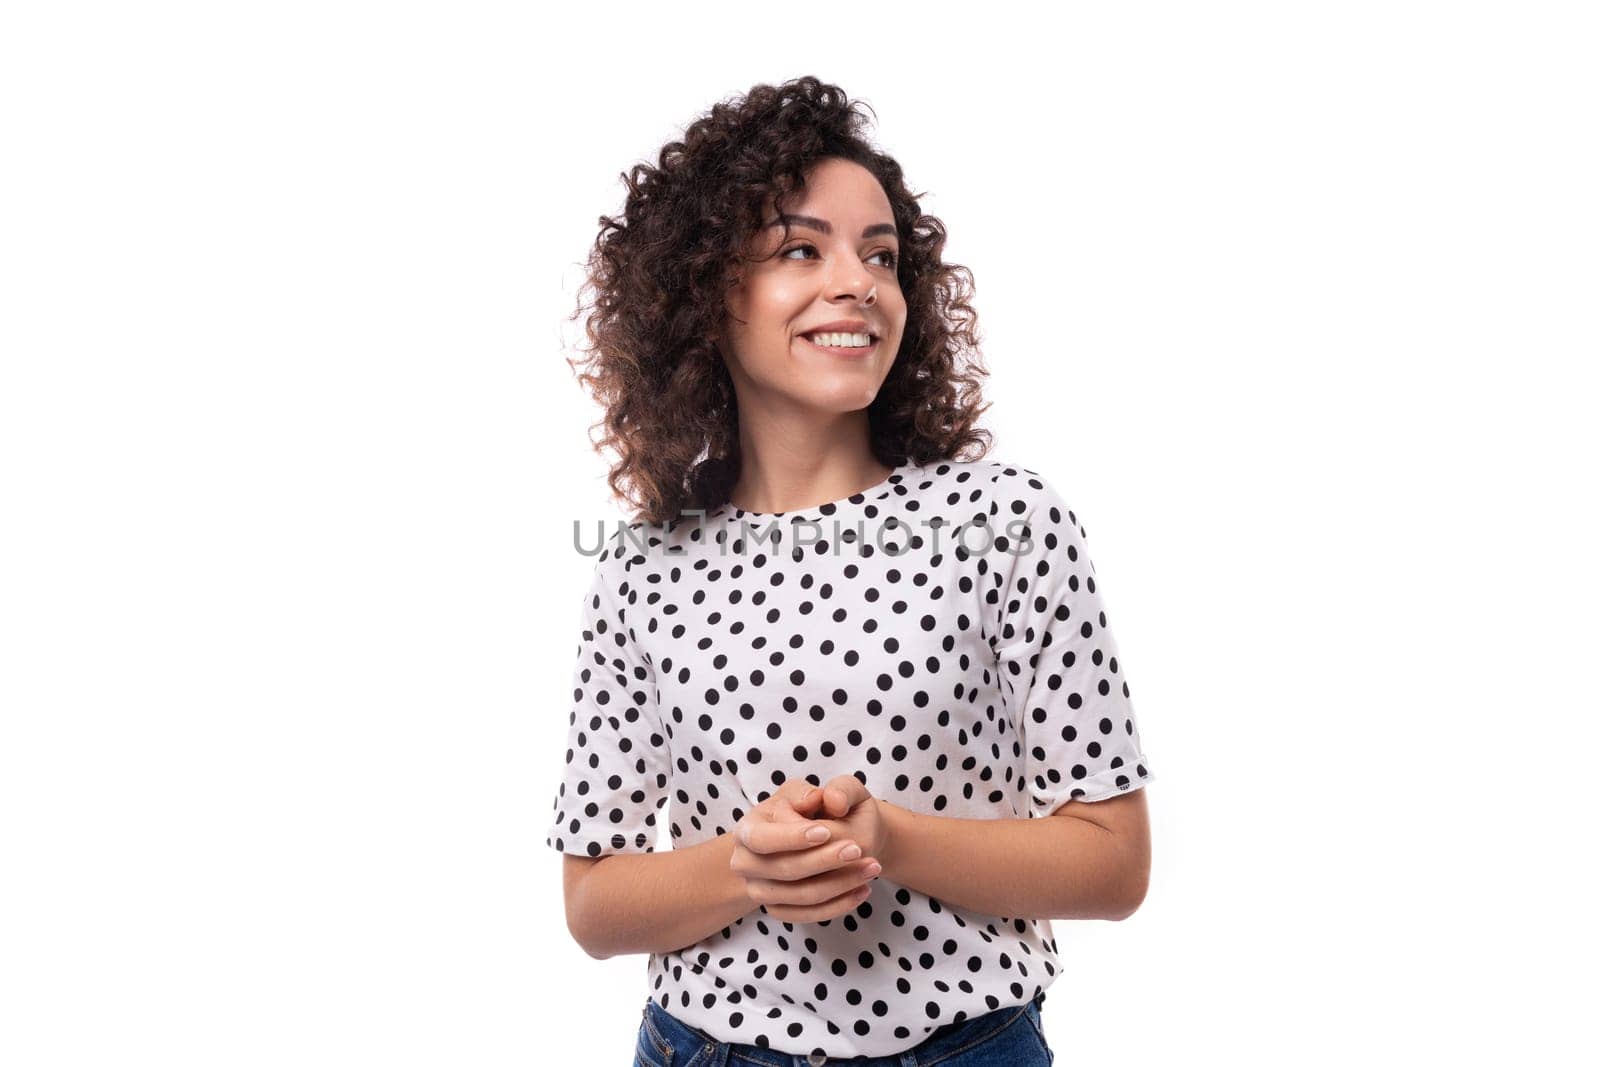 young leader woman with curly hairstyle dressed in summer blouse with polka dot print feels confident by TRMK